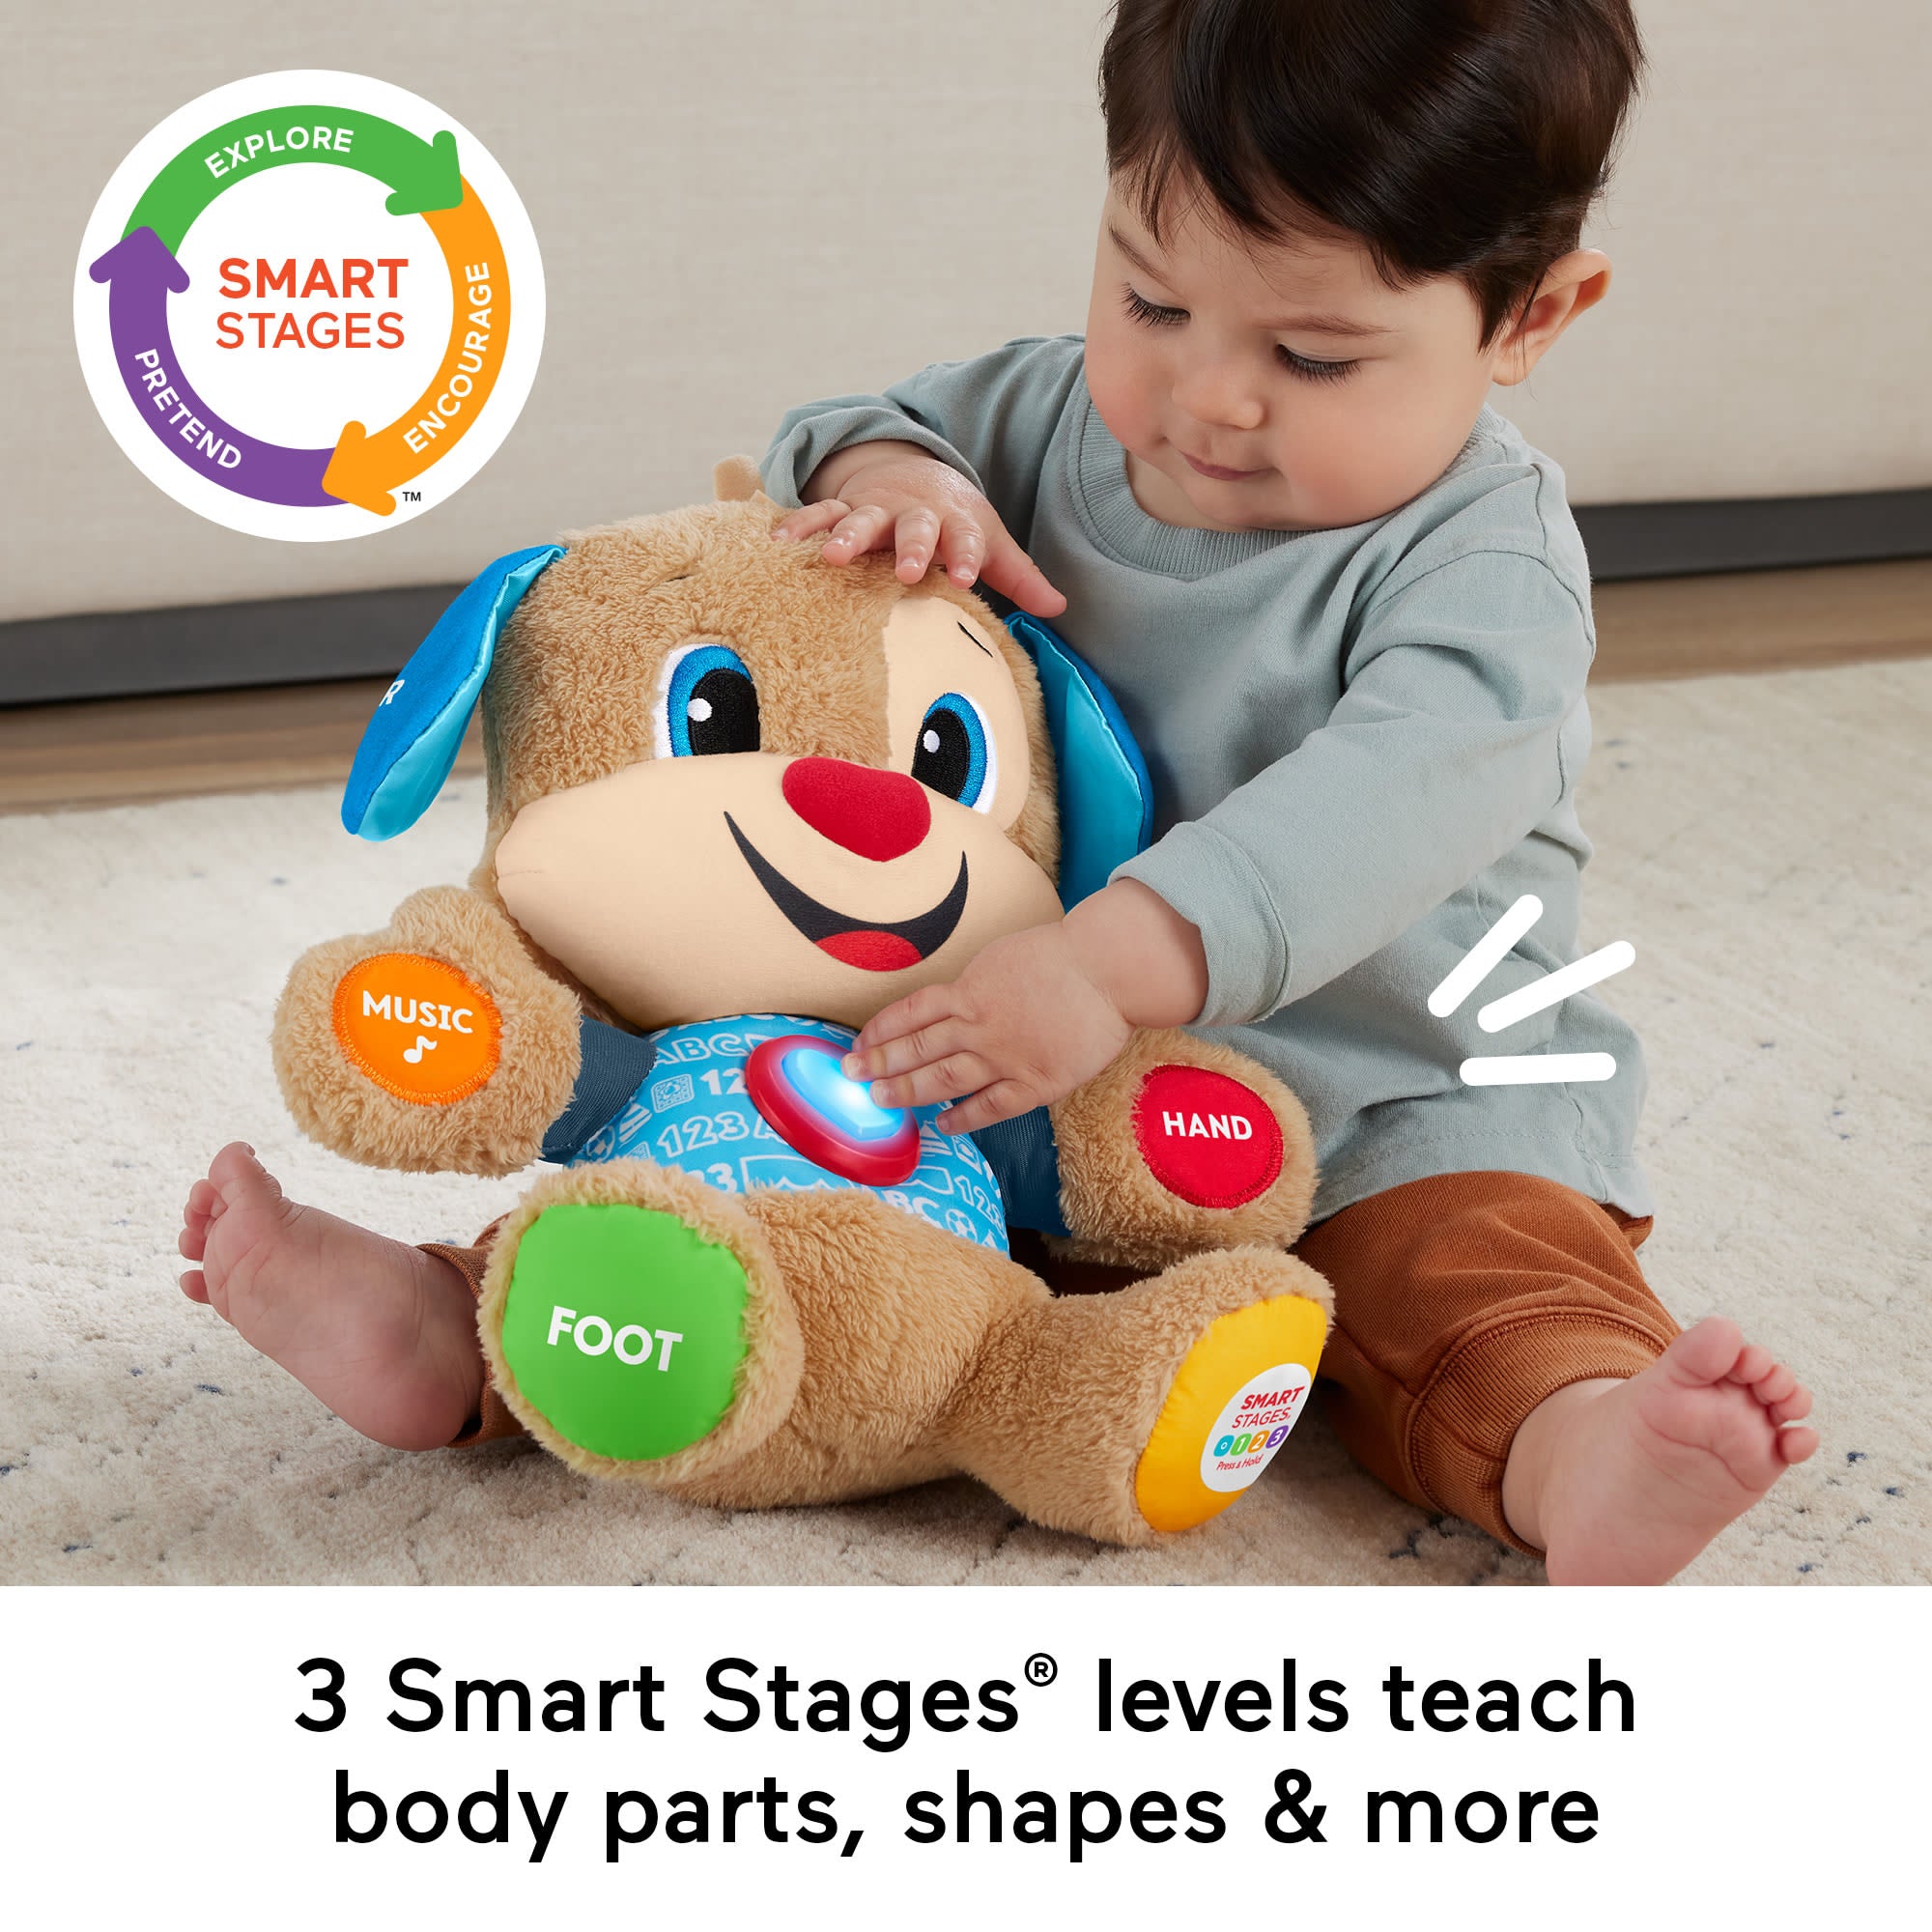 Fisher-Price Laugh N Learn Smart Home Kid's Learning Educational Toy With  Music